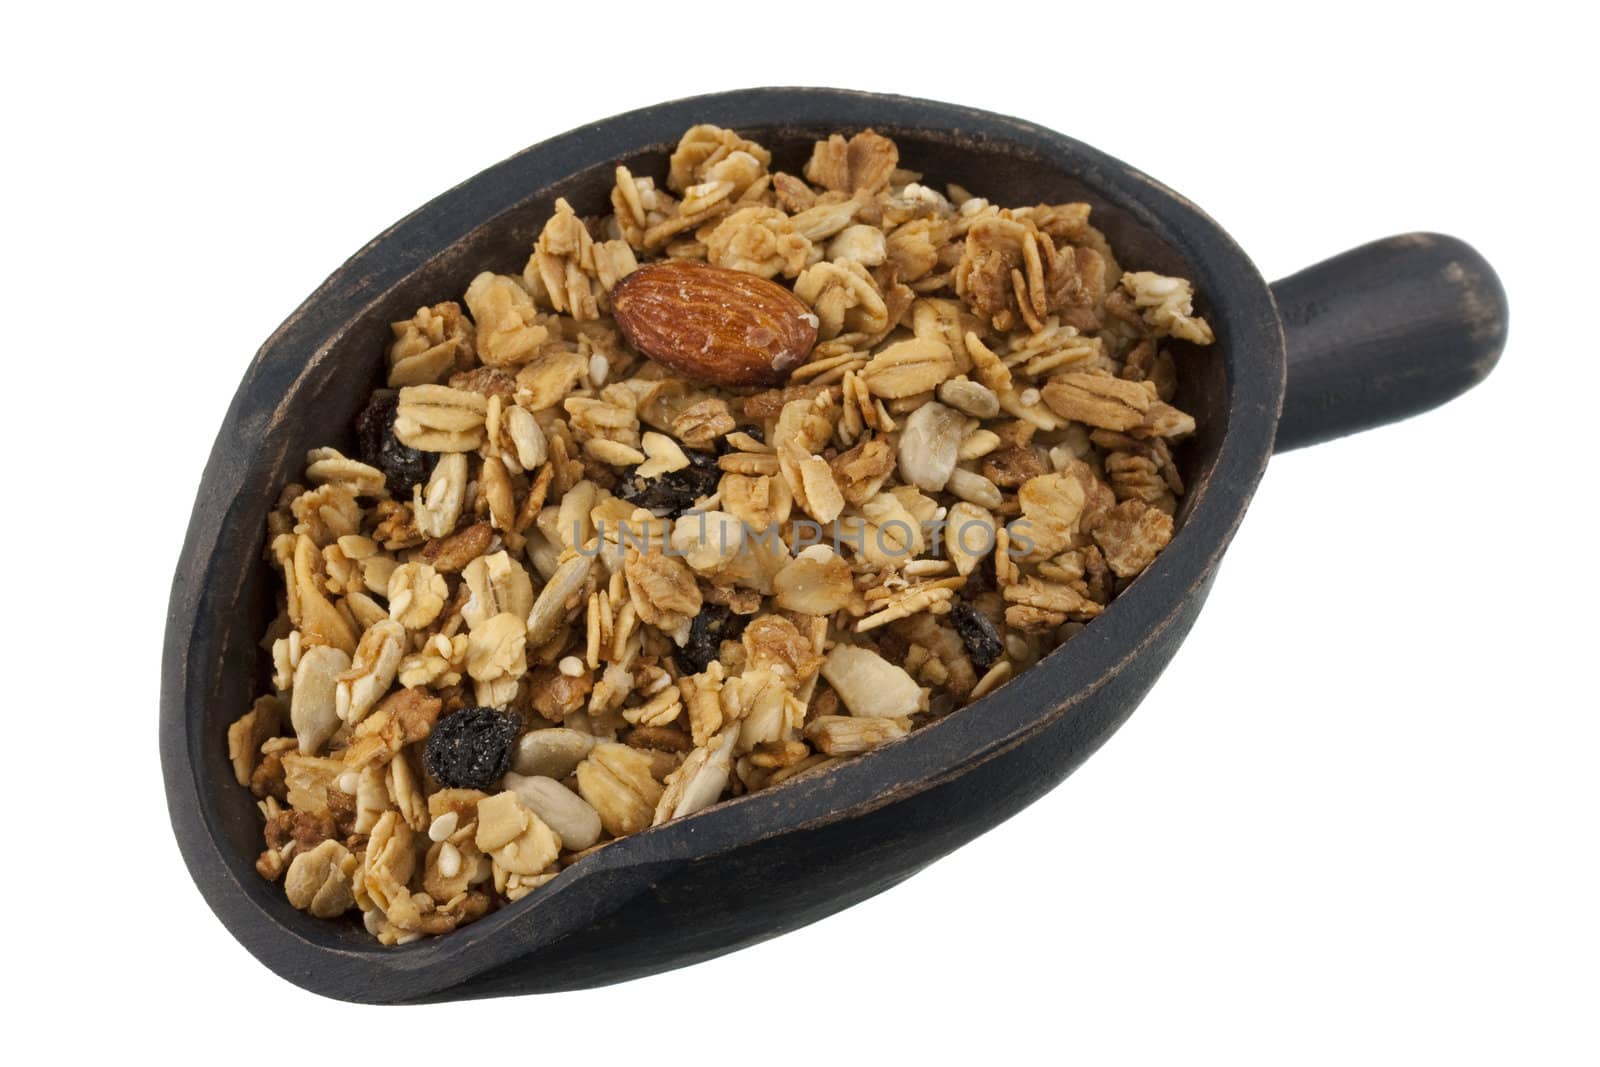 scoop of granola with nuts, seeds and raisins by PixelsAway